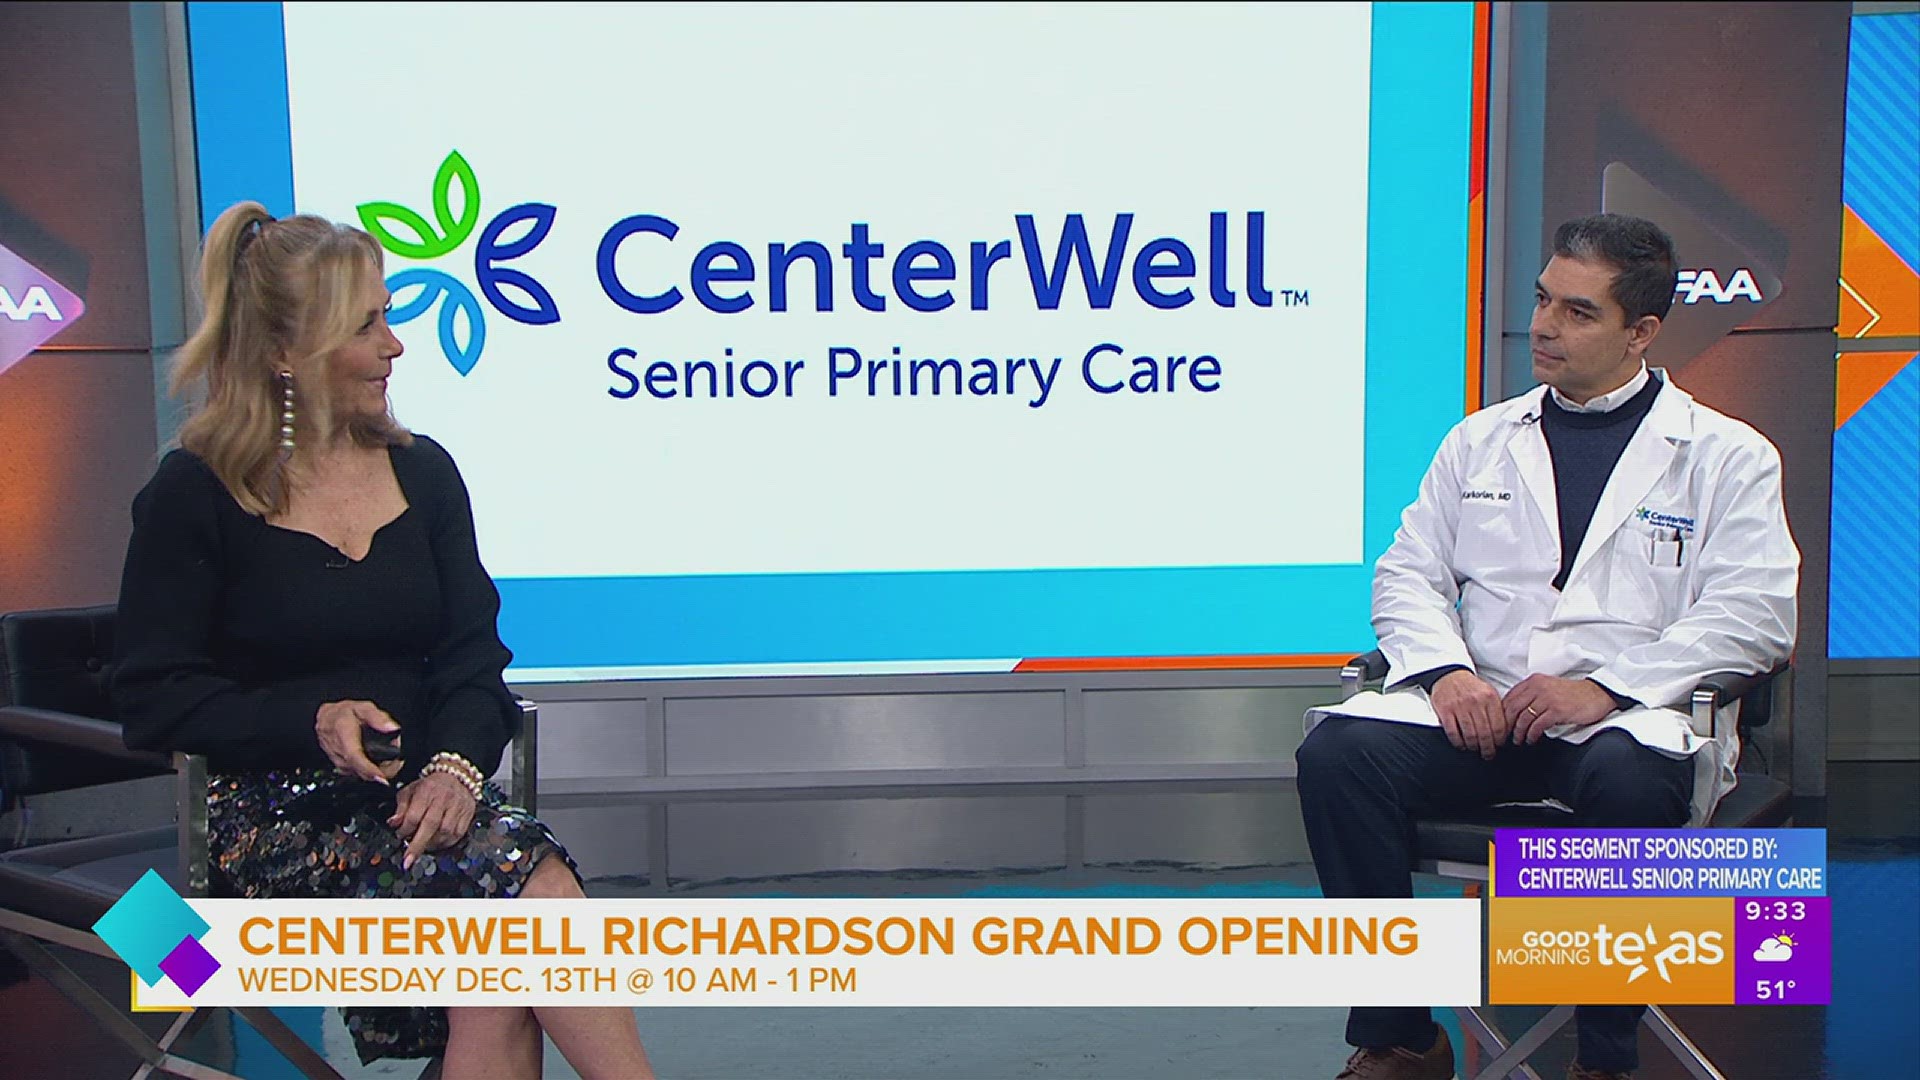 This segment is sponsored by Centerwell Senior Primary Care